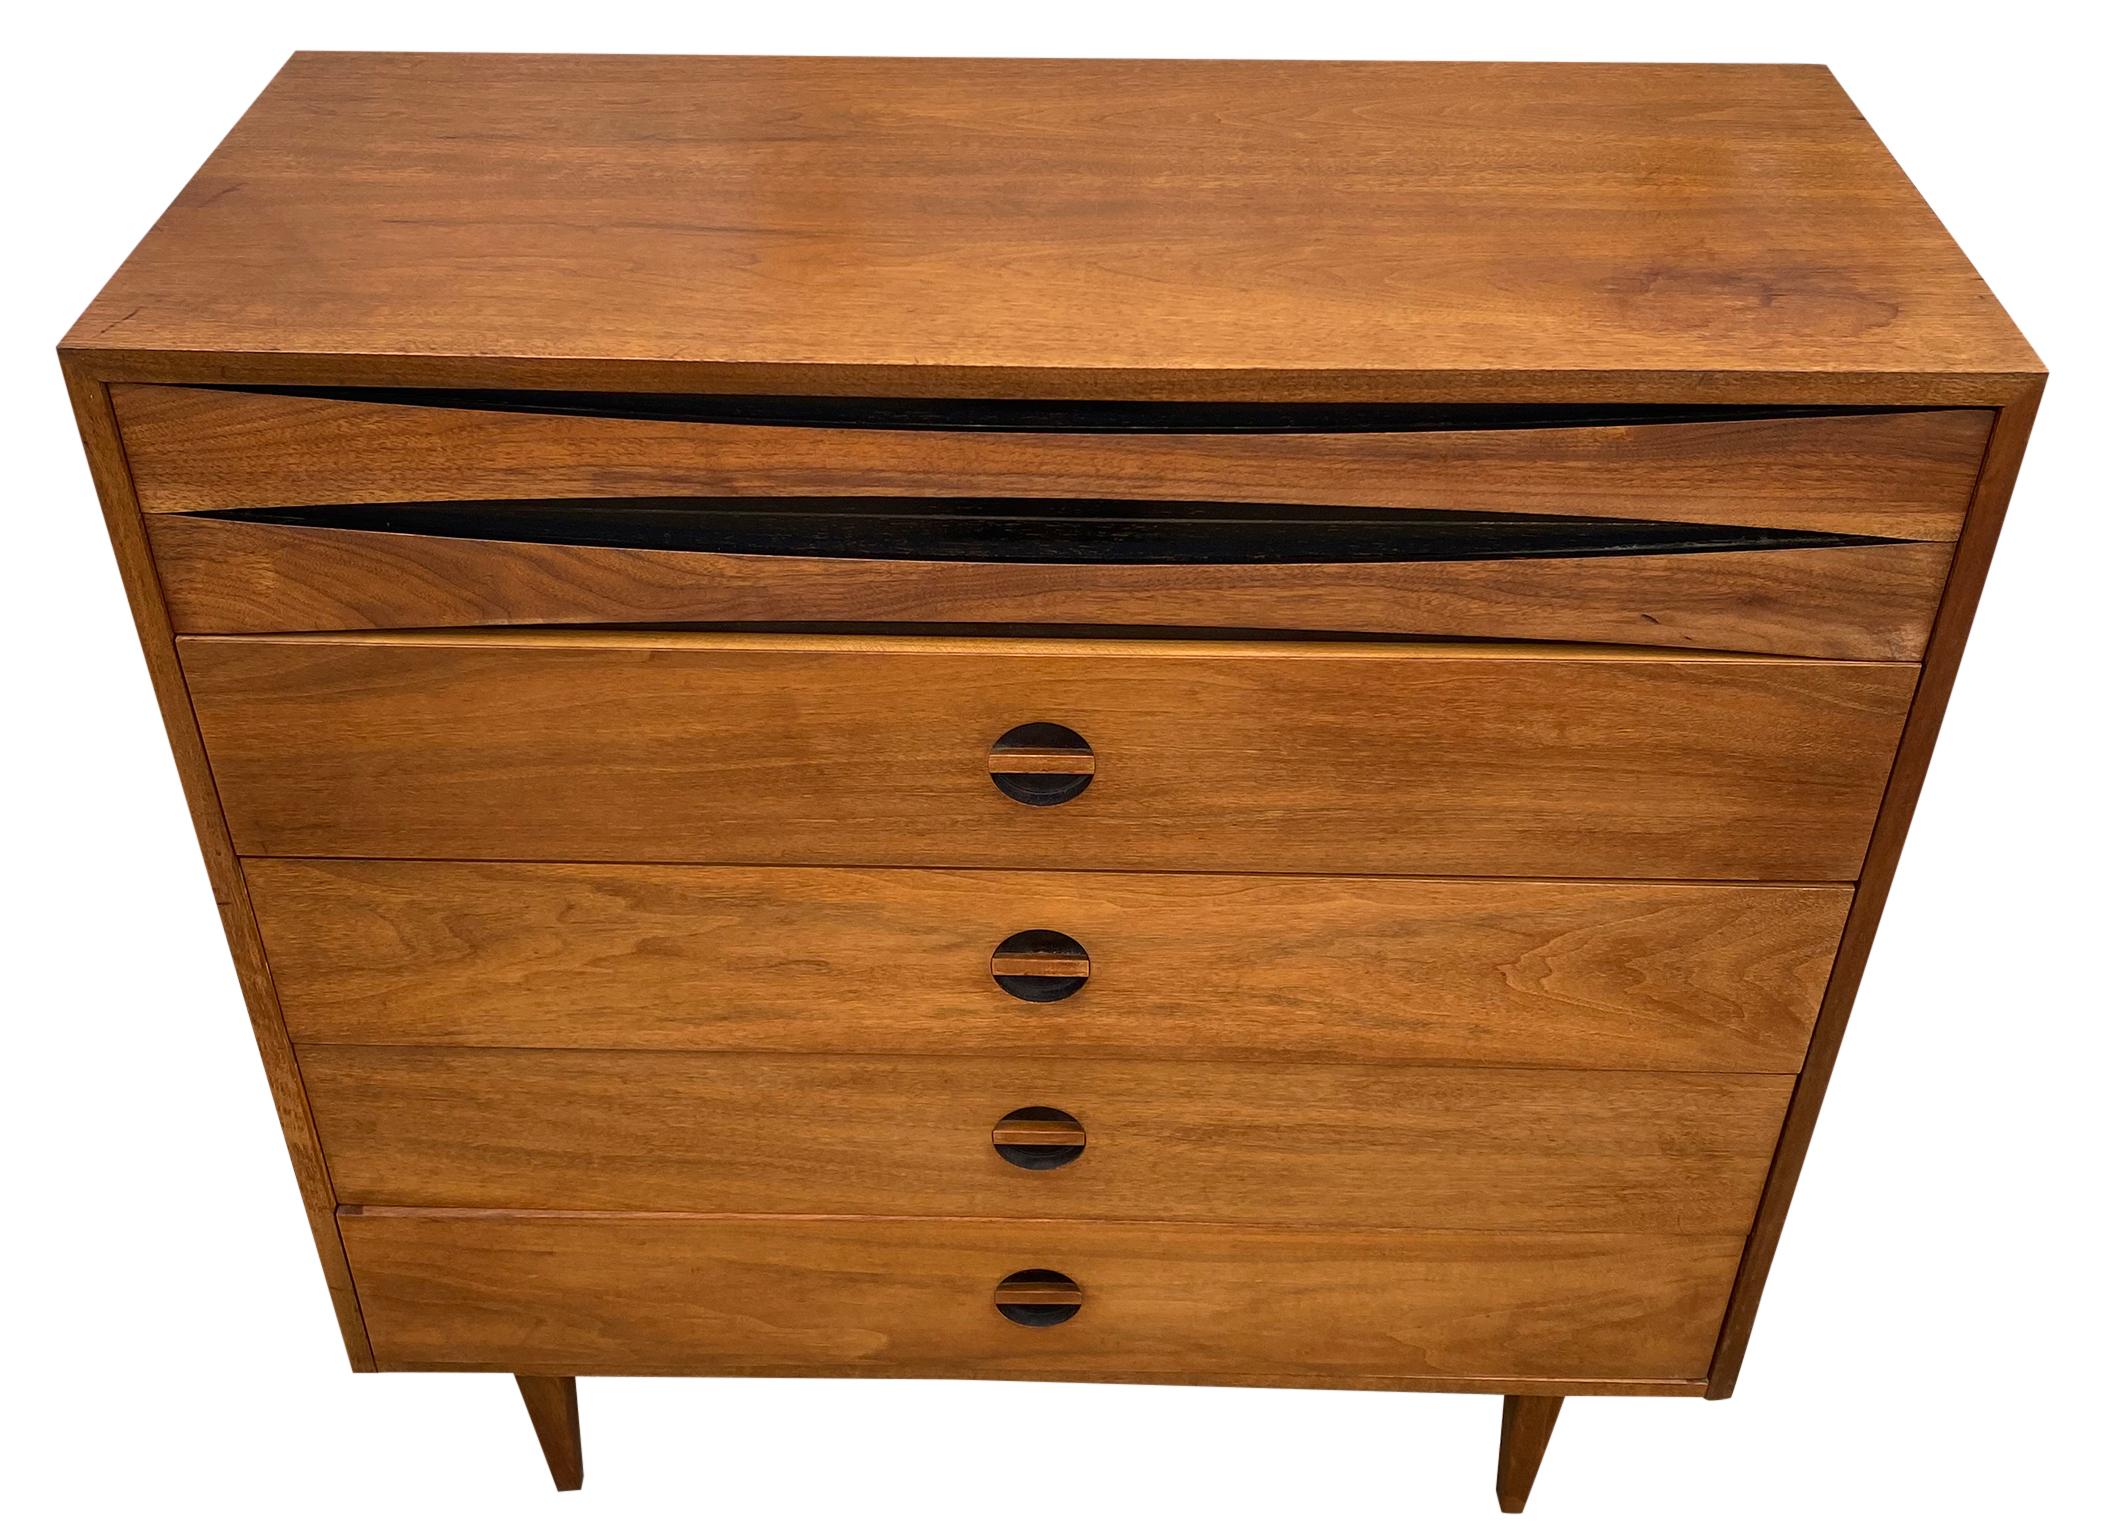 An exceptional Mid-Century Modern Arne Vodder style walnut 5 drawer tall dresser by West Michigan Furniture Co. The dresser features beautiful walnut wood grain with sculpted recessed drawer pulls. It offers ample storage, with 5 deep dovetailed